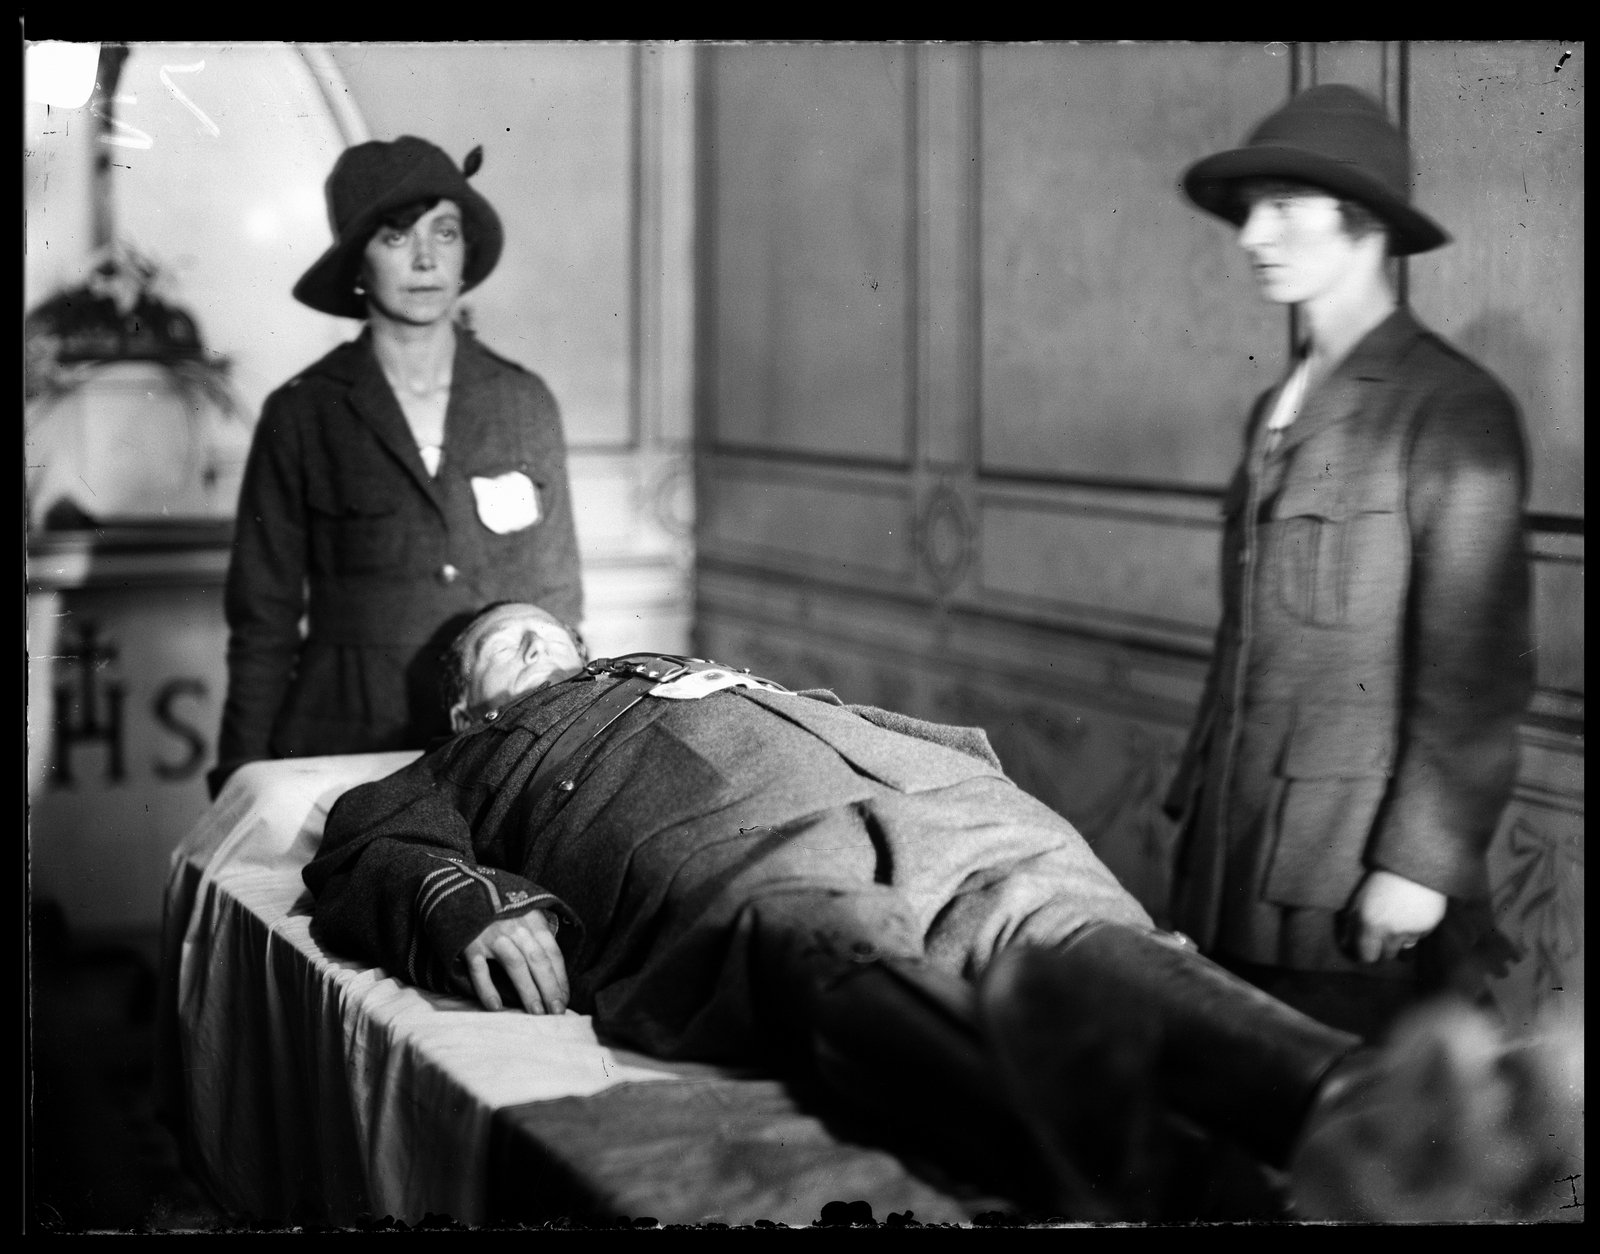 Image - The body of Cathal Brugha lying in state (Credit: RTÉ Photographic Archive, the Cashman Collection)